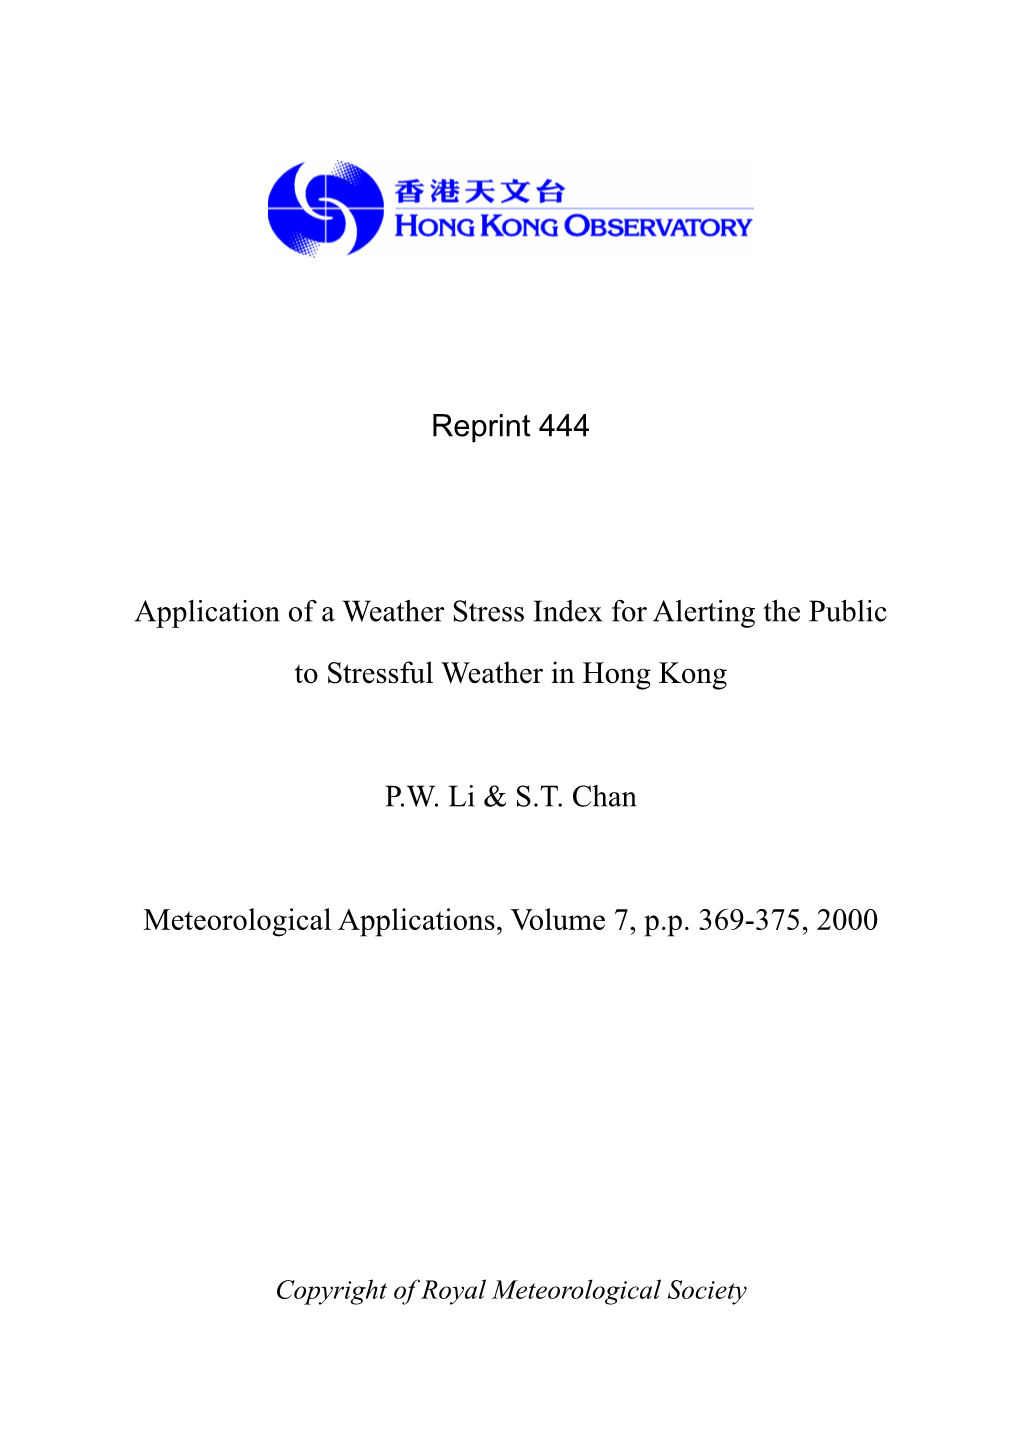 Reprint 444 Application of a Weather Stress